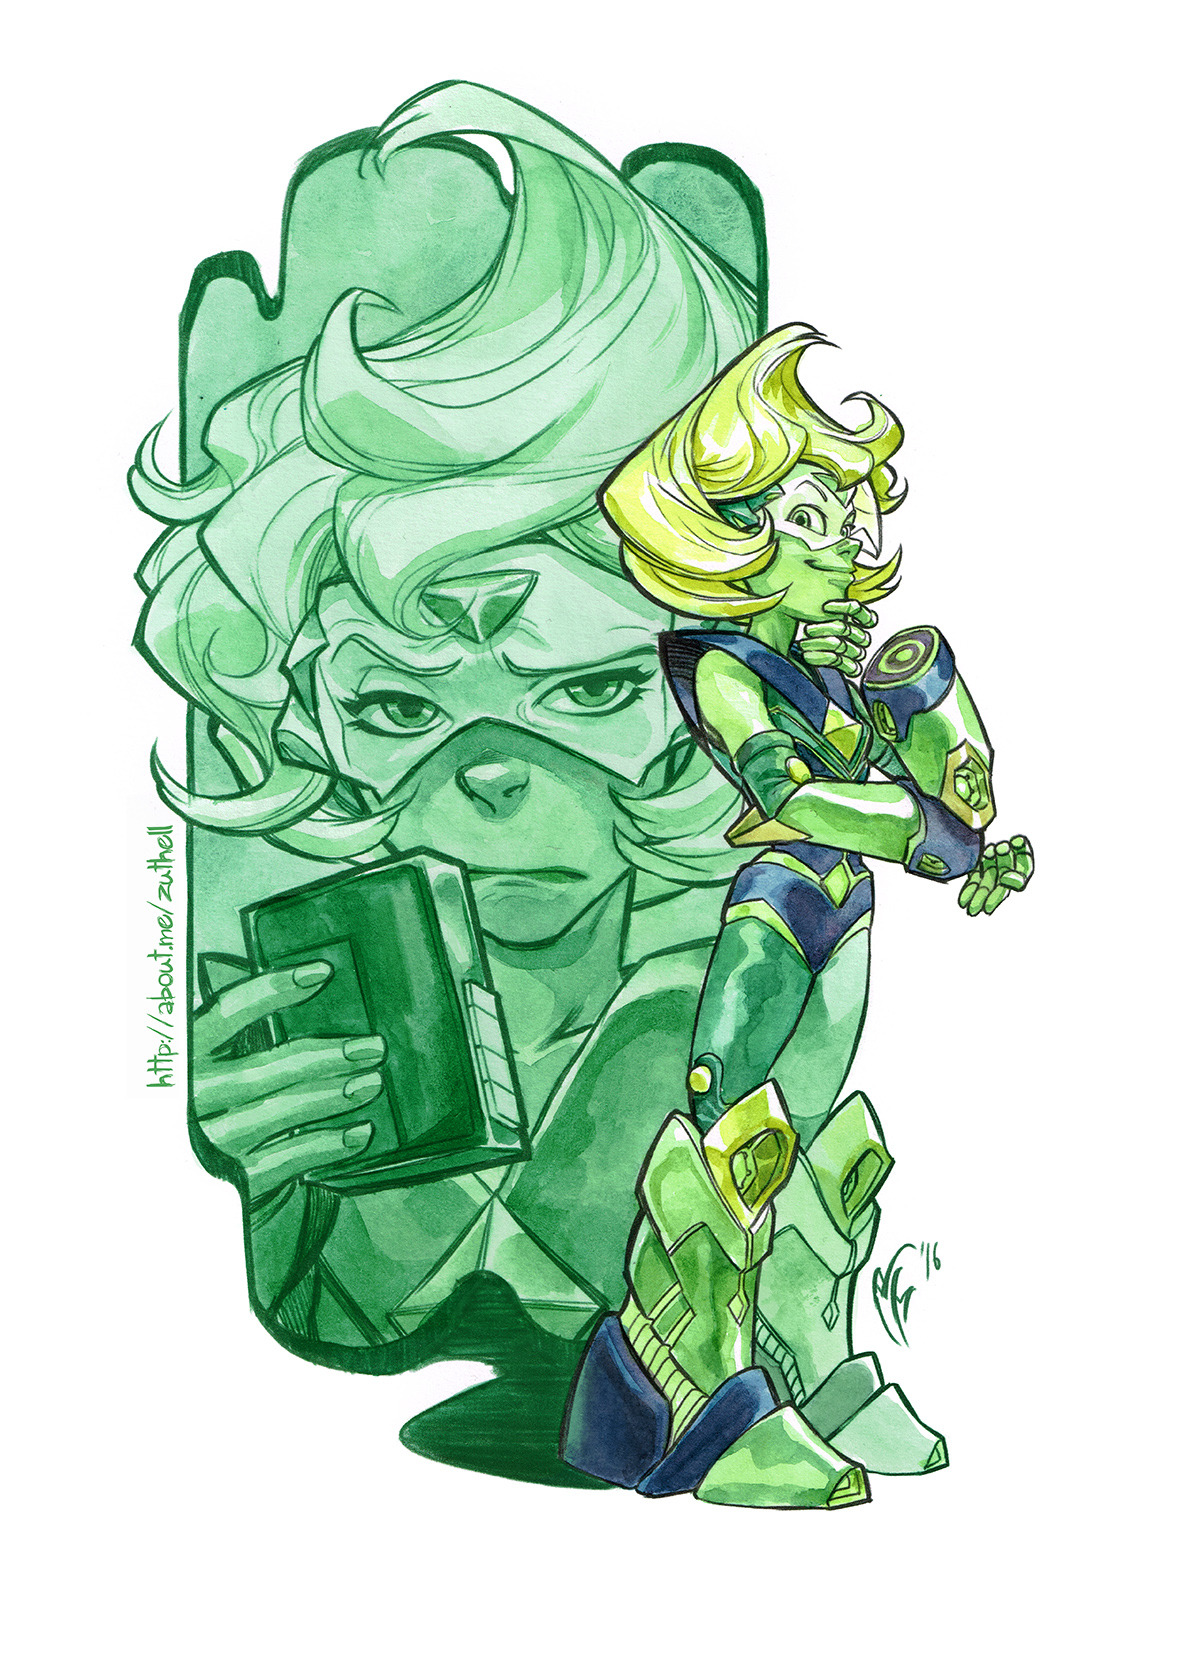 Next one! Peridot is painted… YOU CLODS!